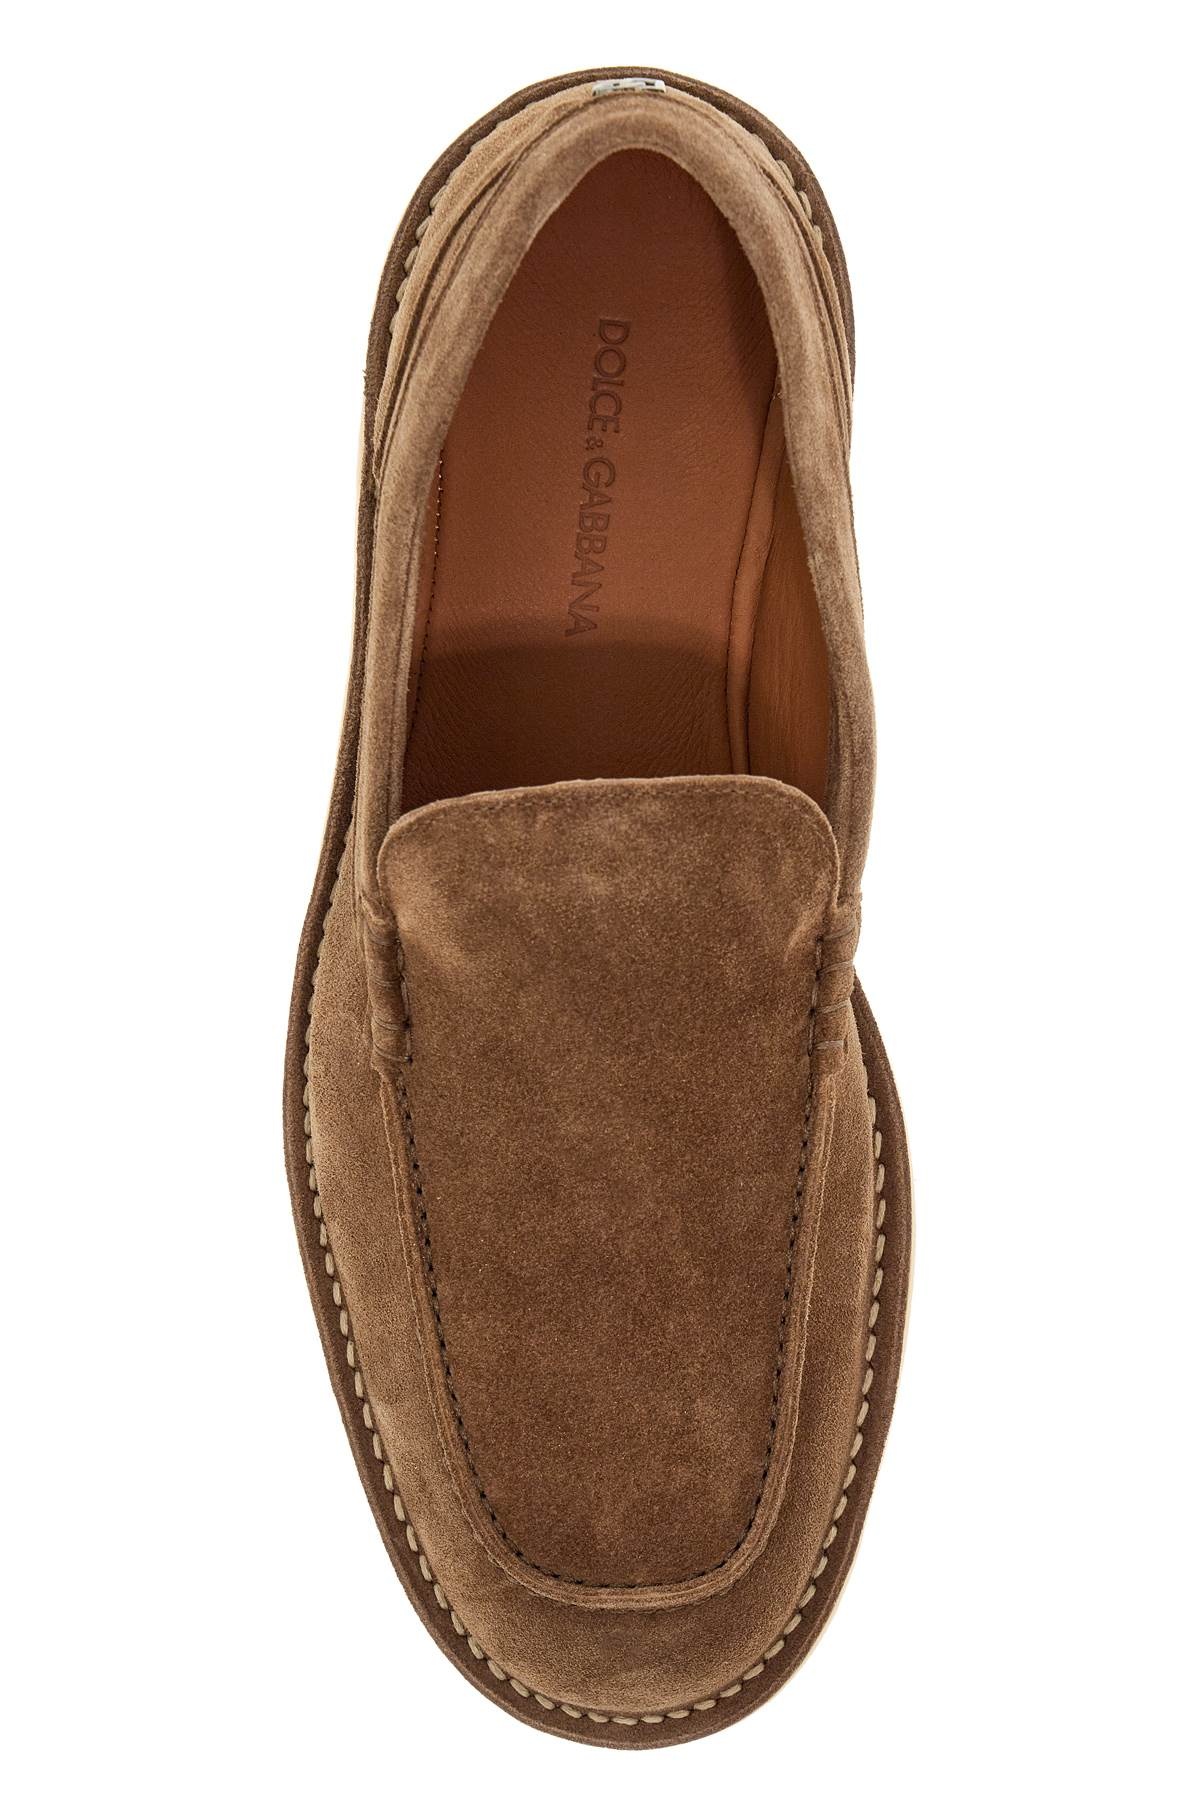 Dolce & Gabbana Suede Leather Moccas Men - 2